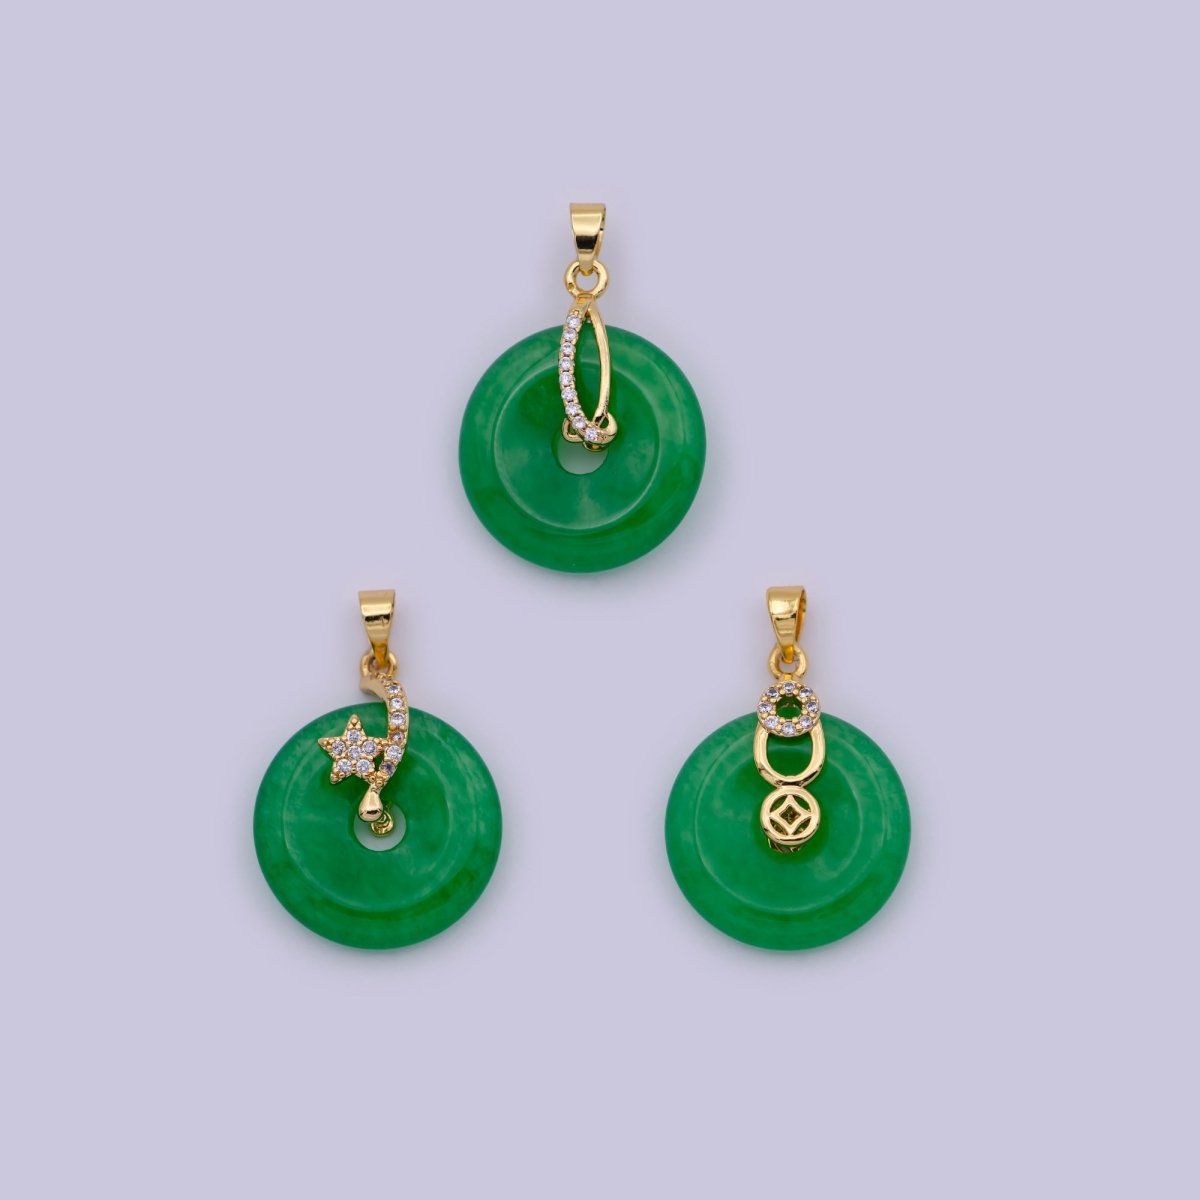 24k Gold Filled Round Jade Stone charm, Green Donut Stone Pendant, Jade Stone Pendant, Star Charm Jewelry Necklace, O-095,O-096,O-098 - DLUXCA